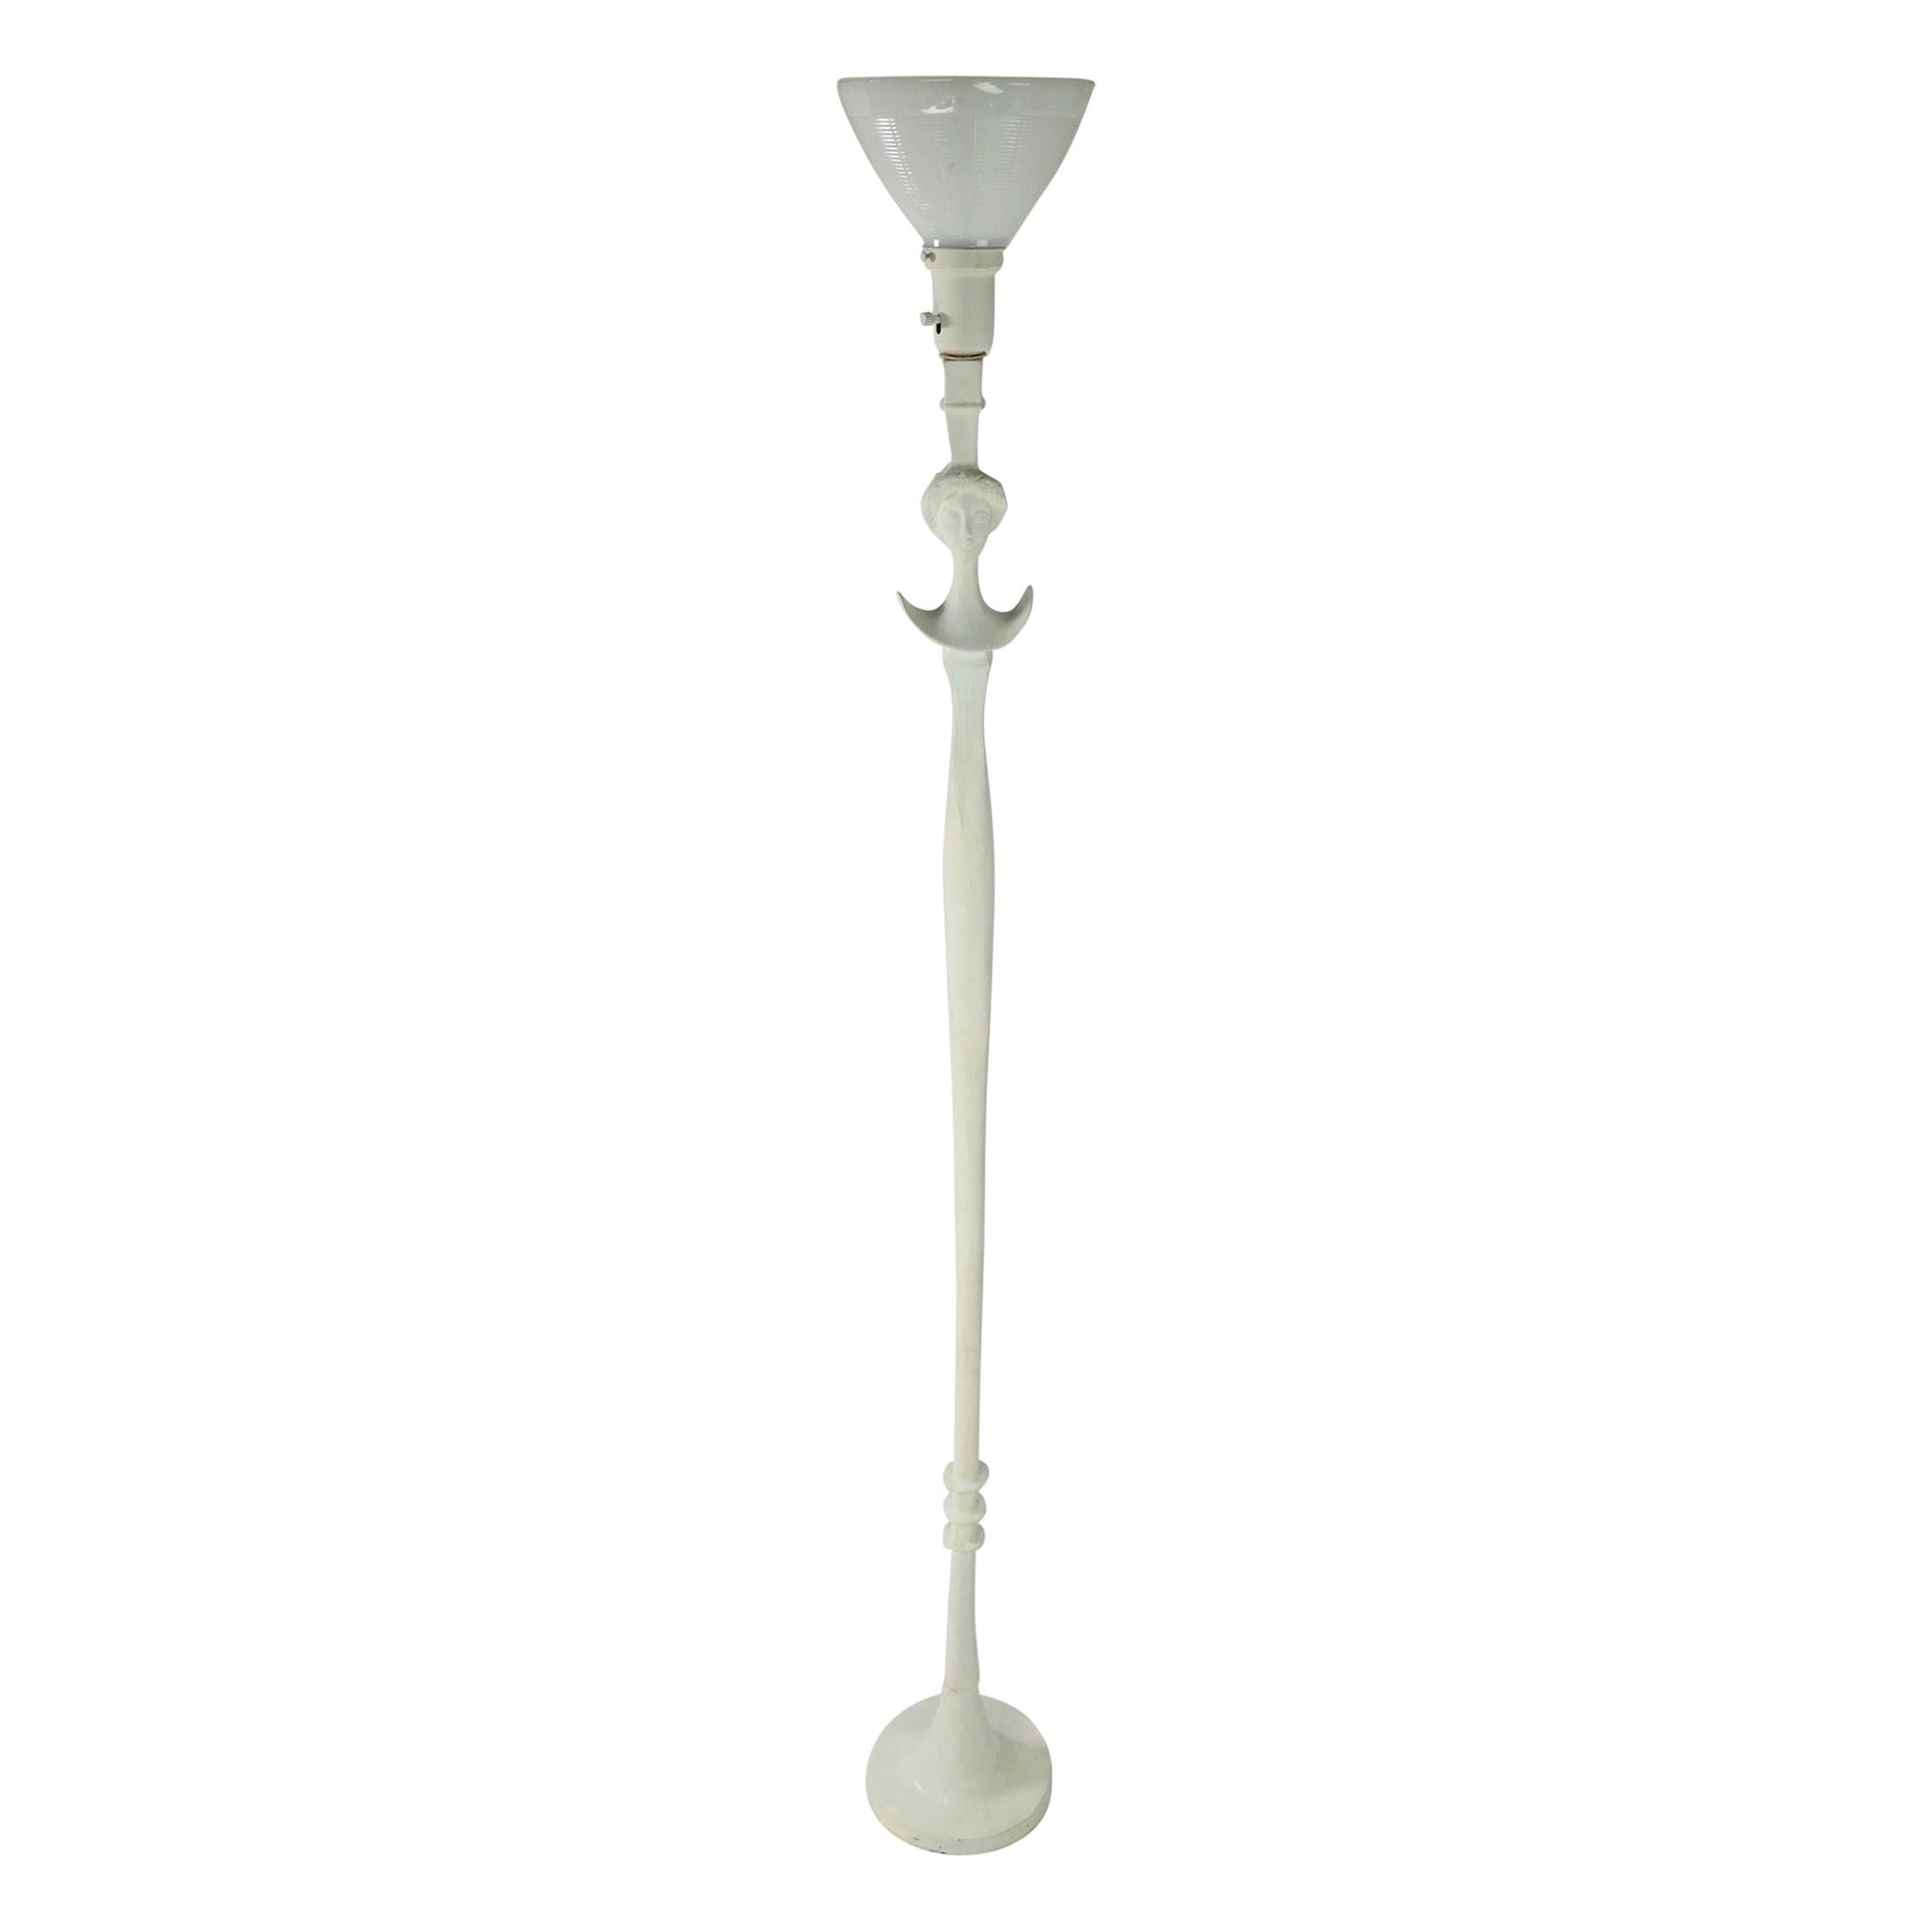 Plaster Tete De Femme Floor Lamp by Sirmos after Giacometti